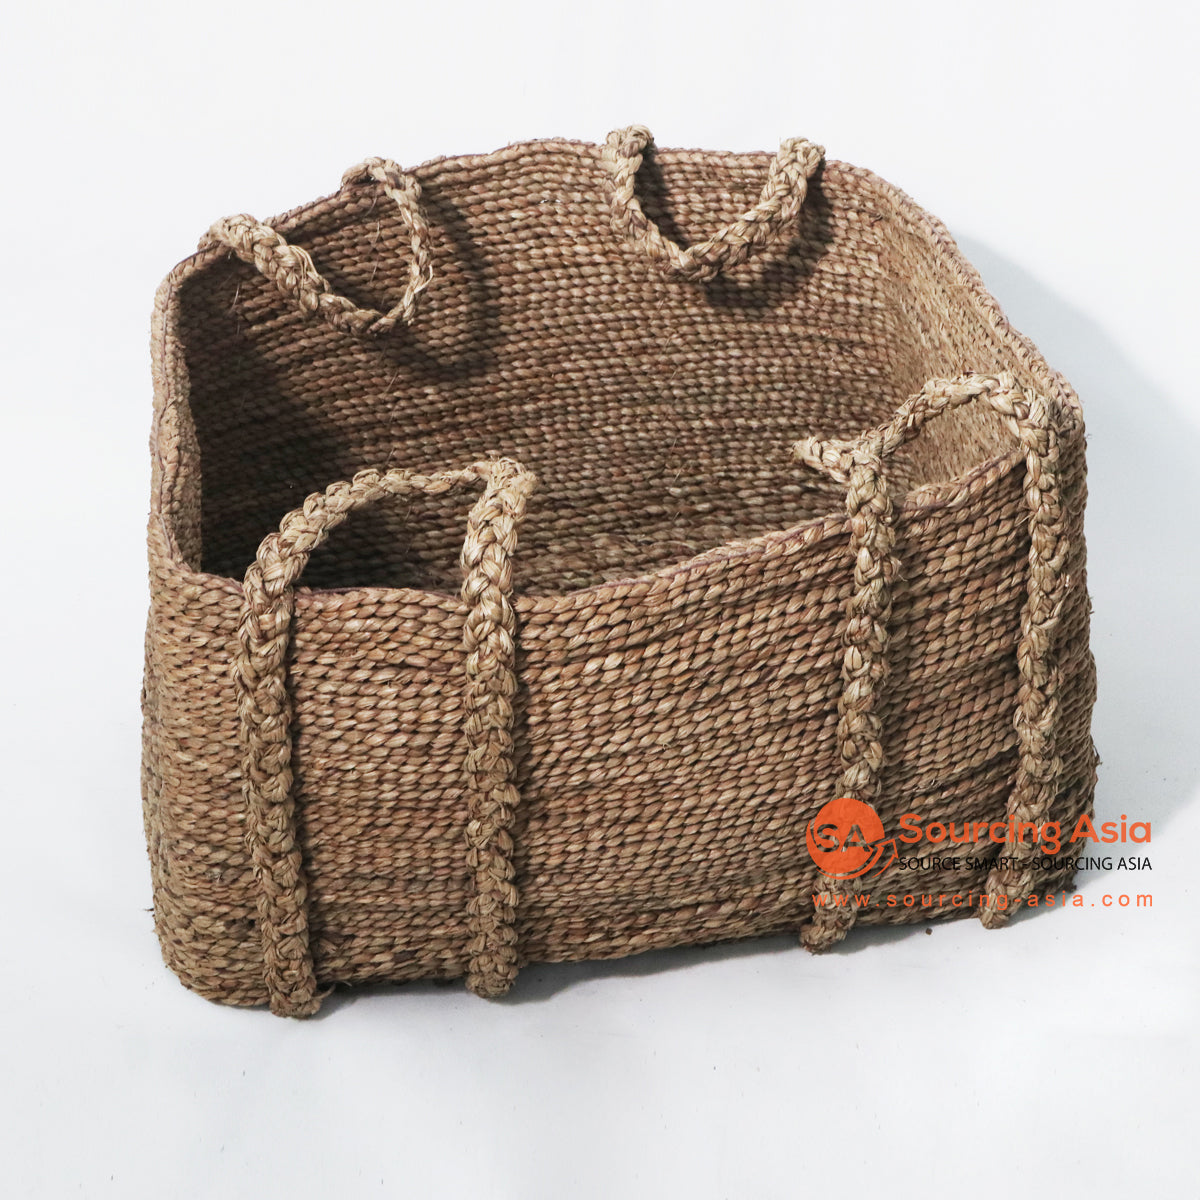 MERC038 NATURAL MENDONG SQUARE BASKET WITH FOUR HANDLES